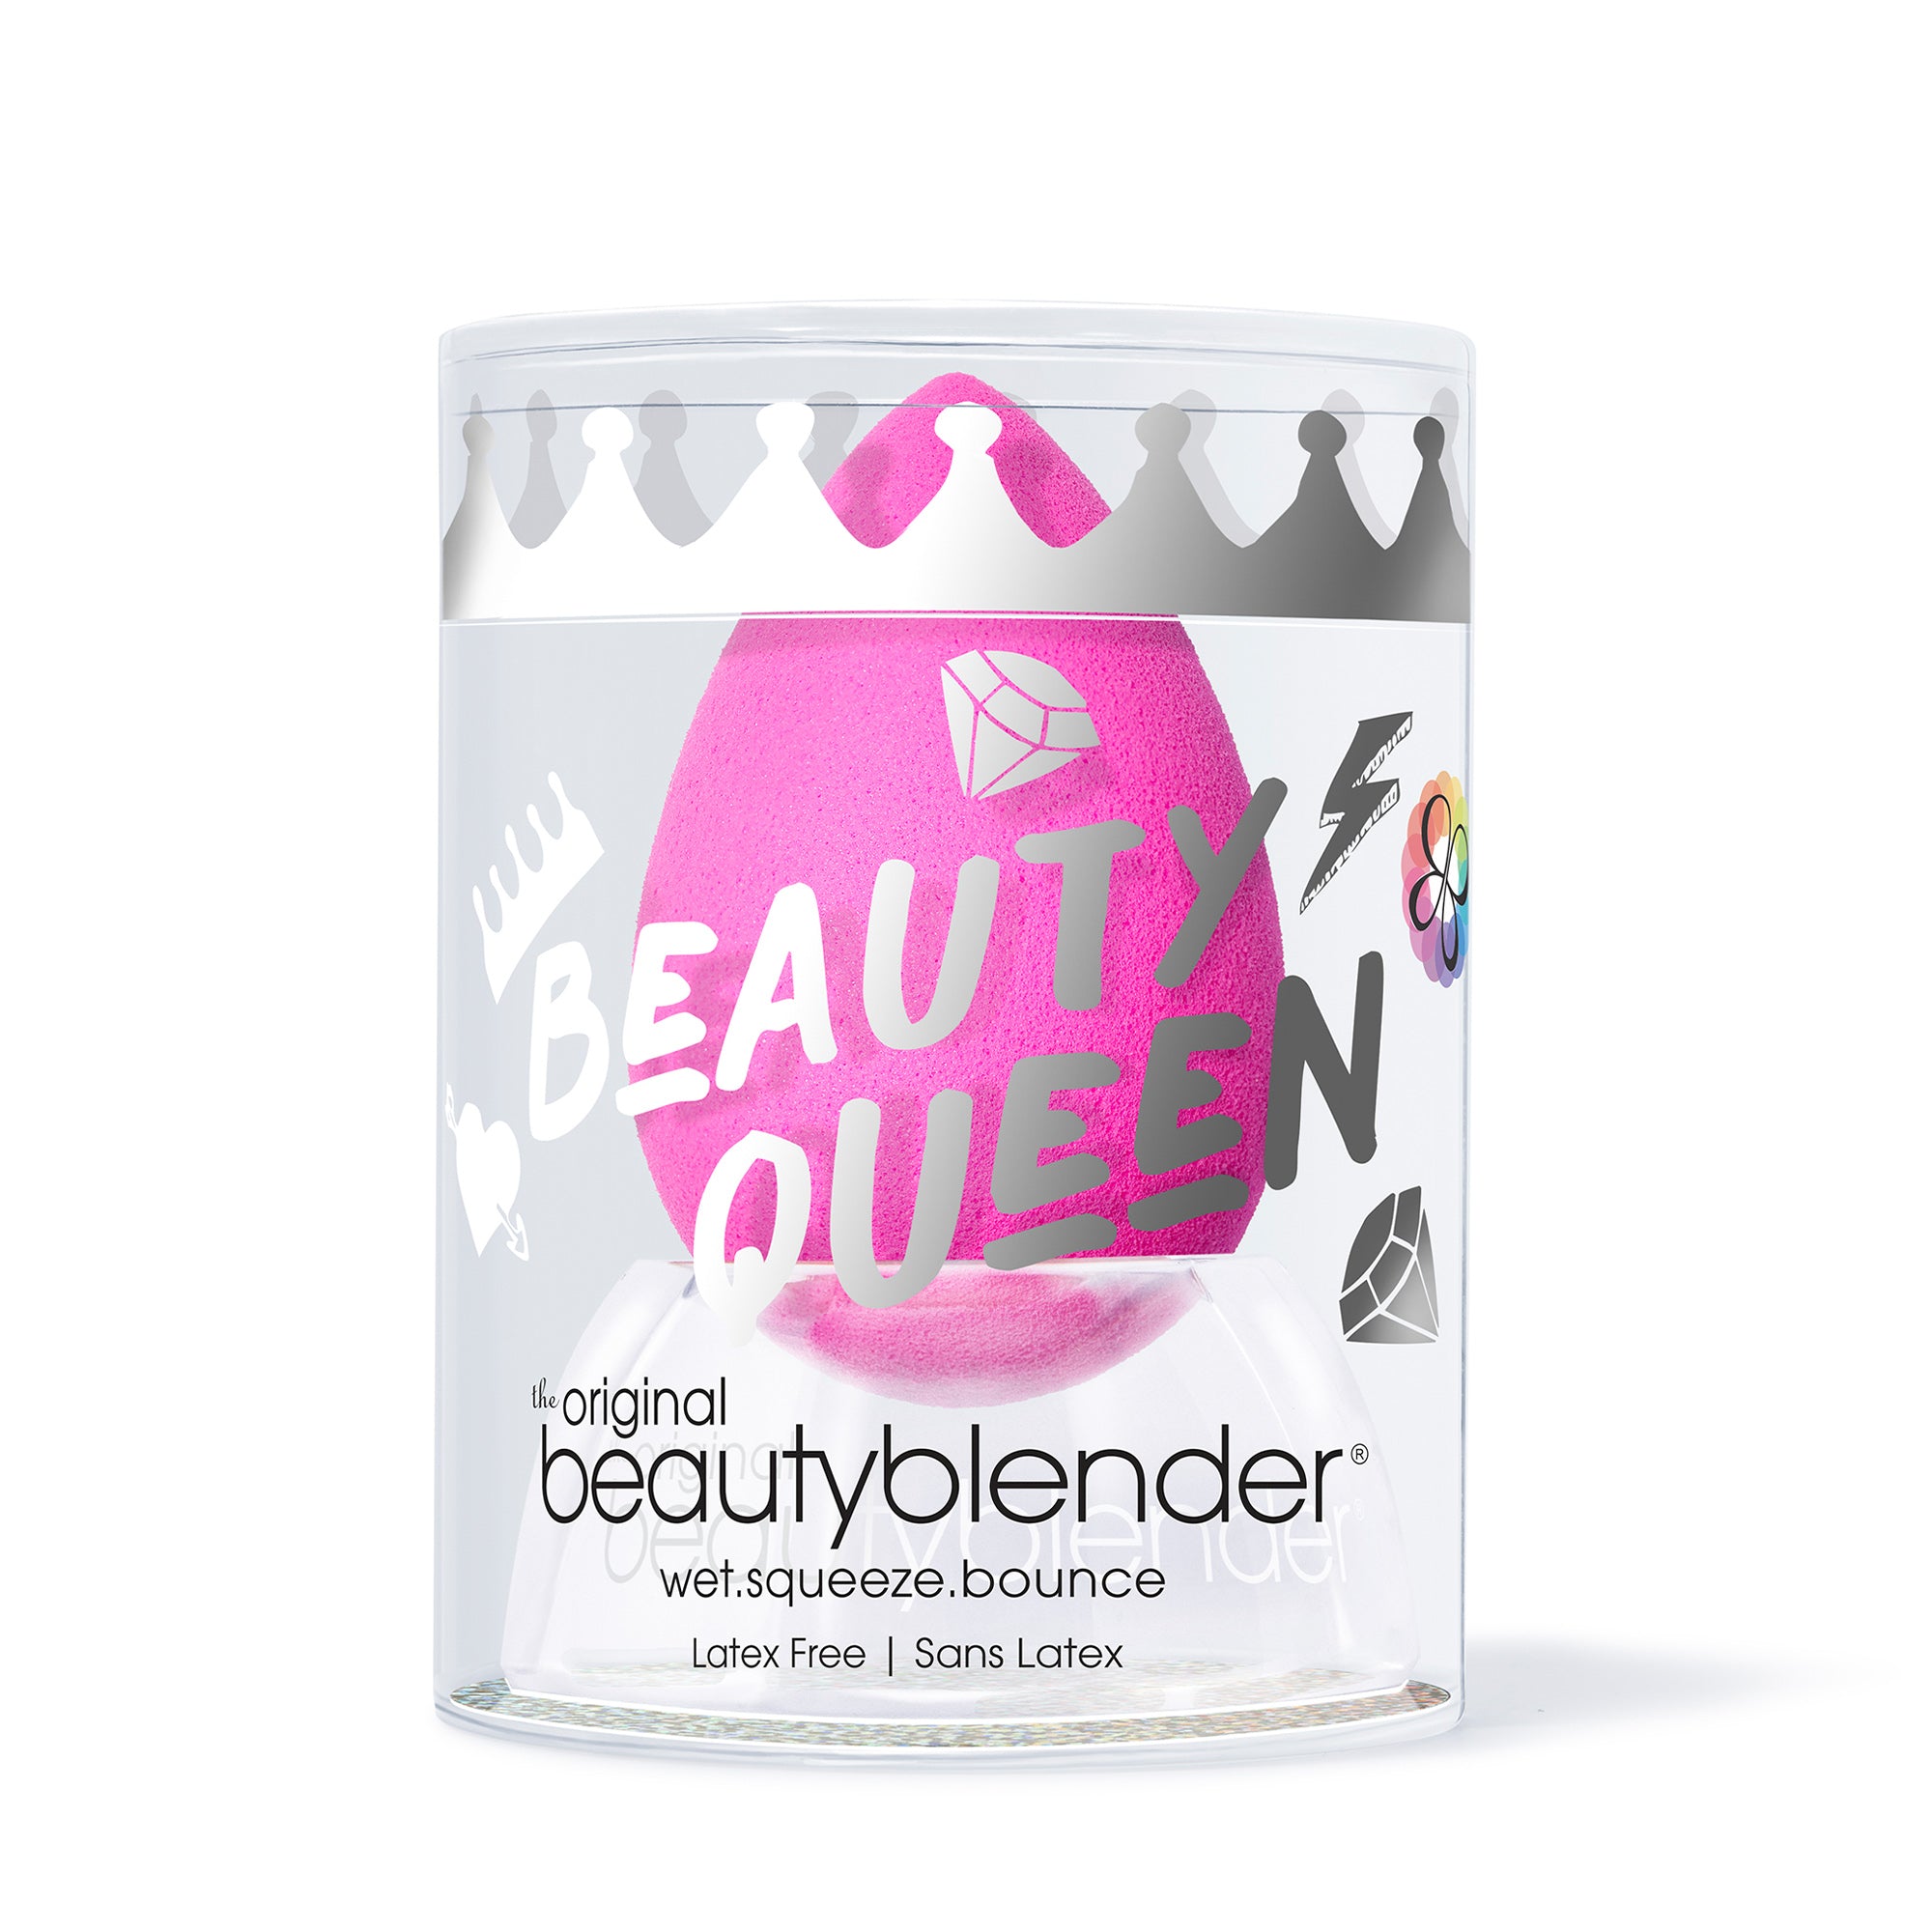 The Original Beautyblender® Beauty Queen Limited-Edition with Crystal Nest